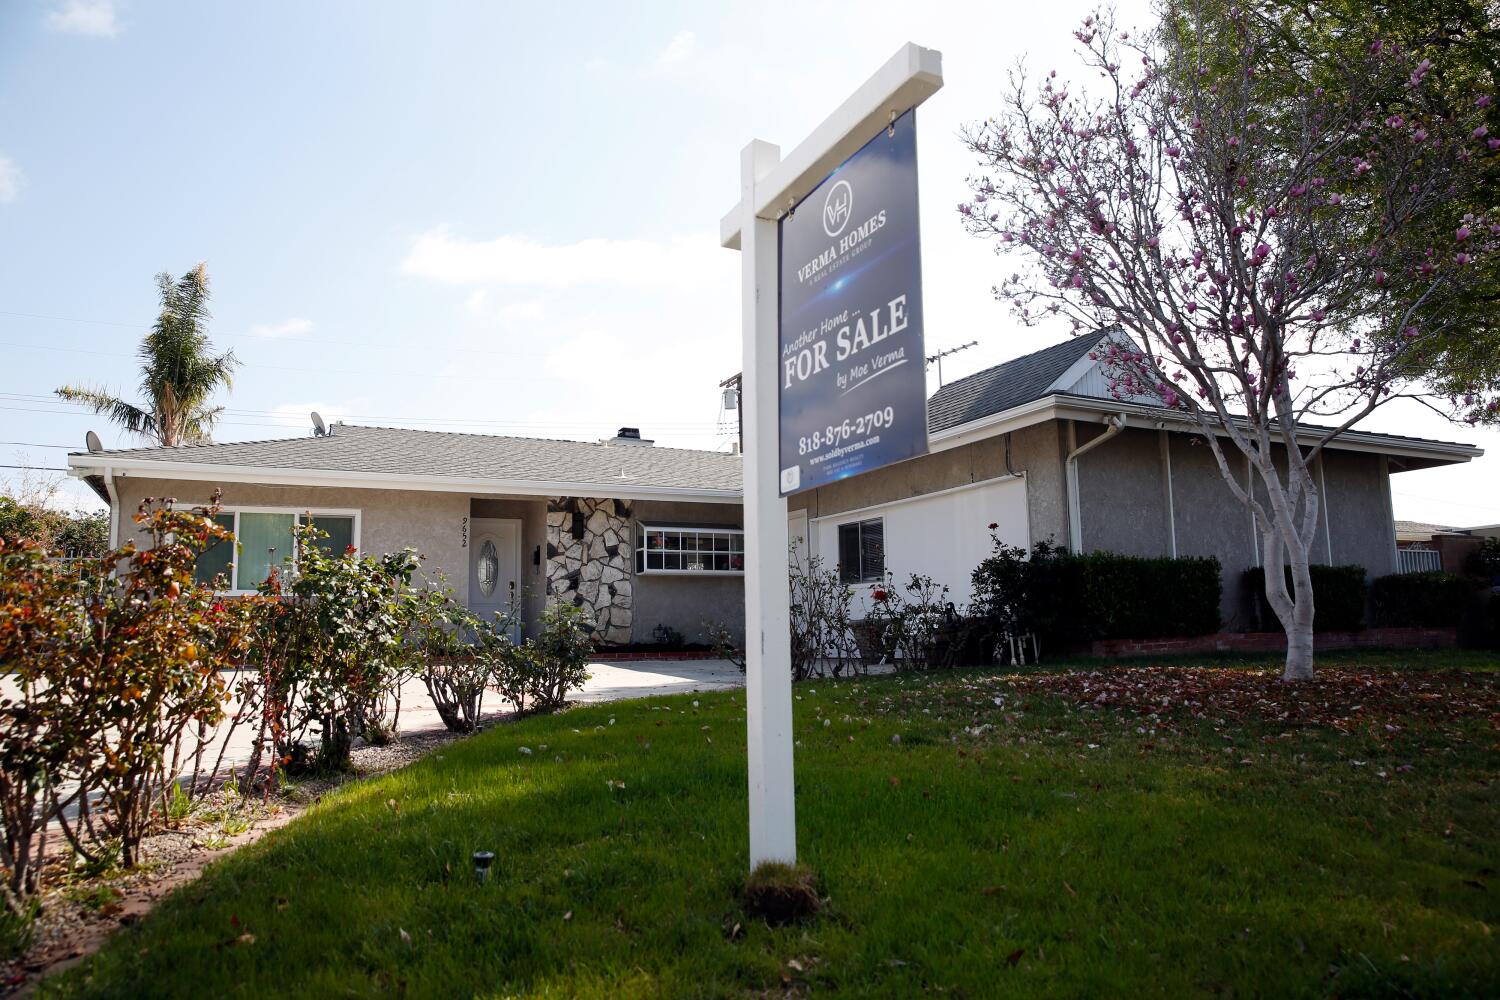 Southern California prices are at a record. Could relief be on the way?